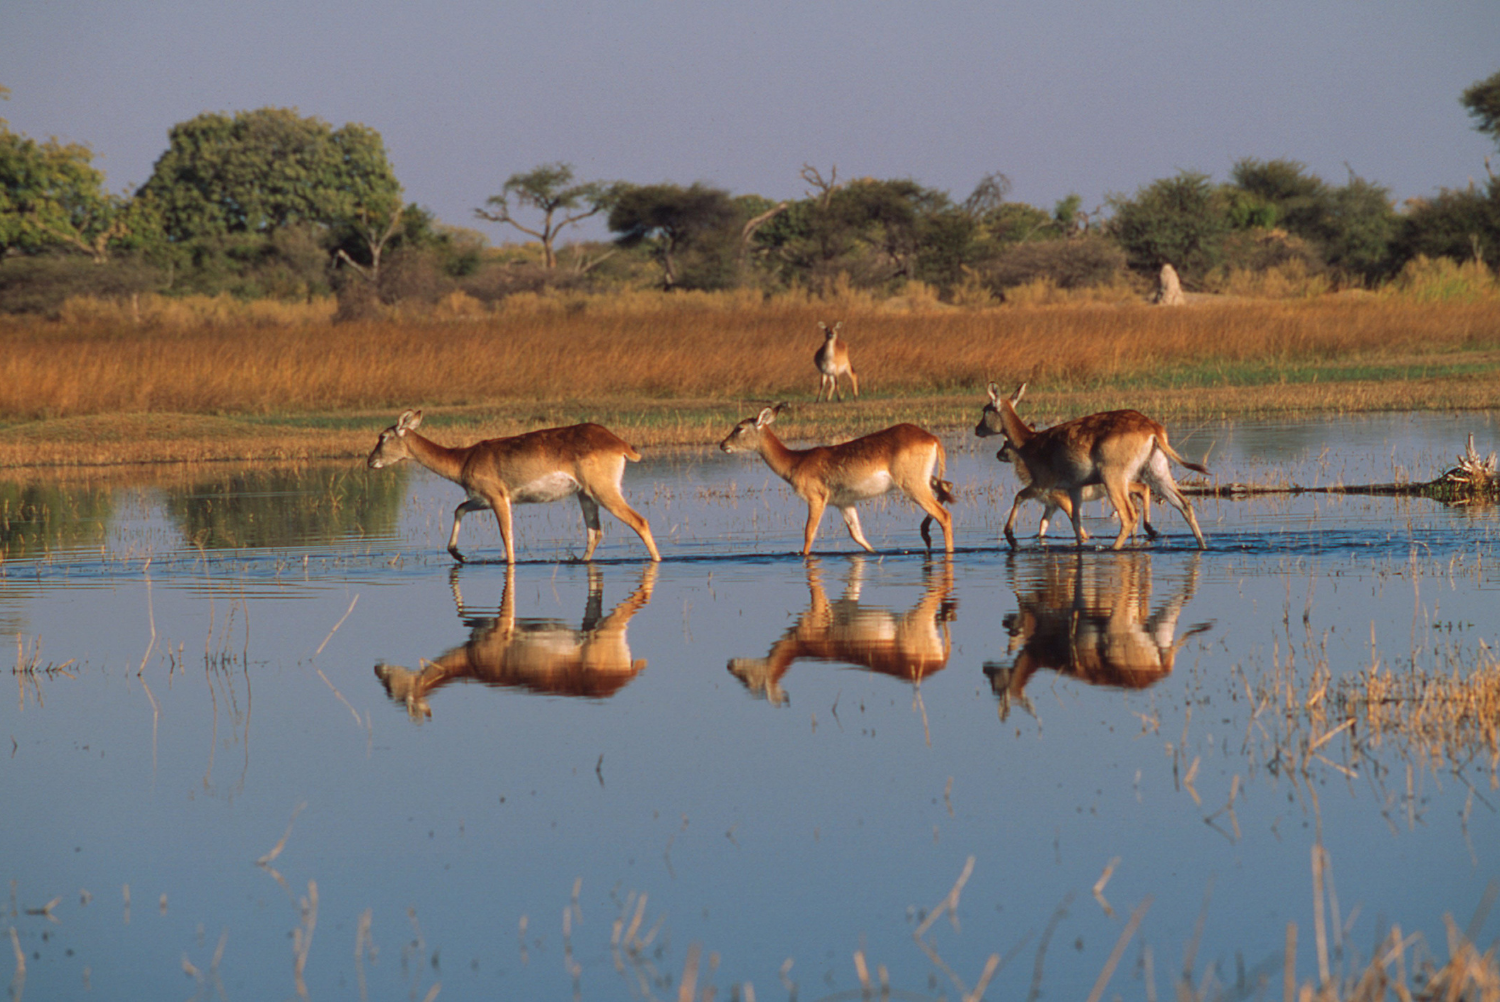 Kobus leche leche Red lechwe Females in typical flood plain habitat. Most common and characteristic antelope of Okovango delta, Botswana